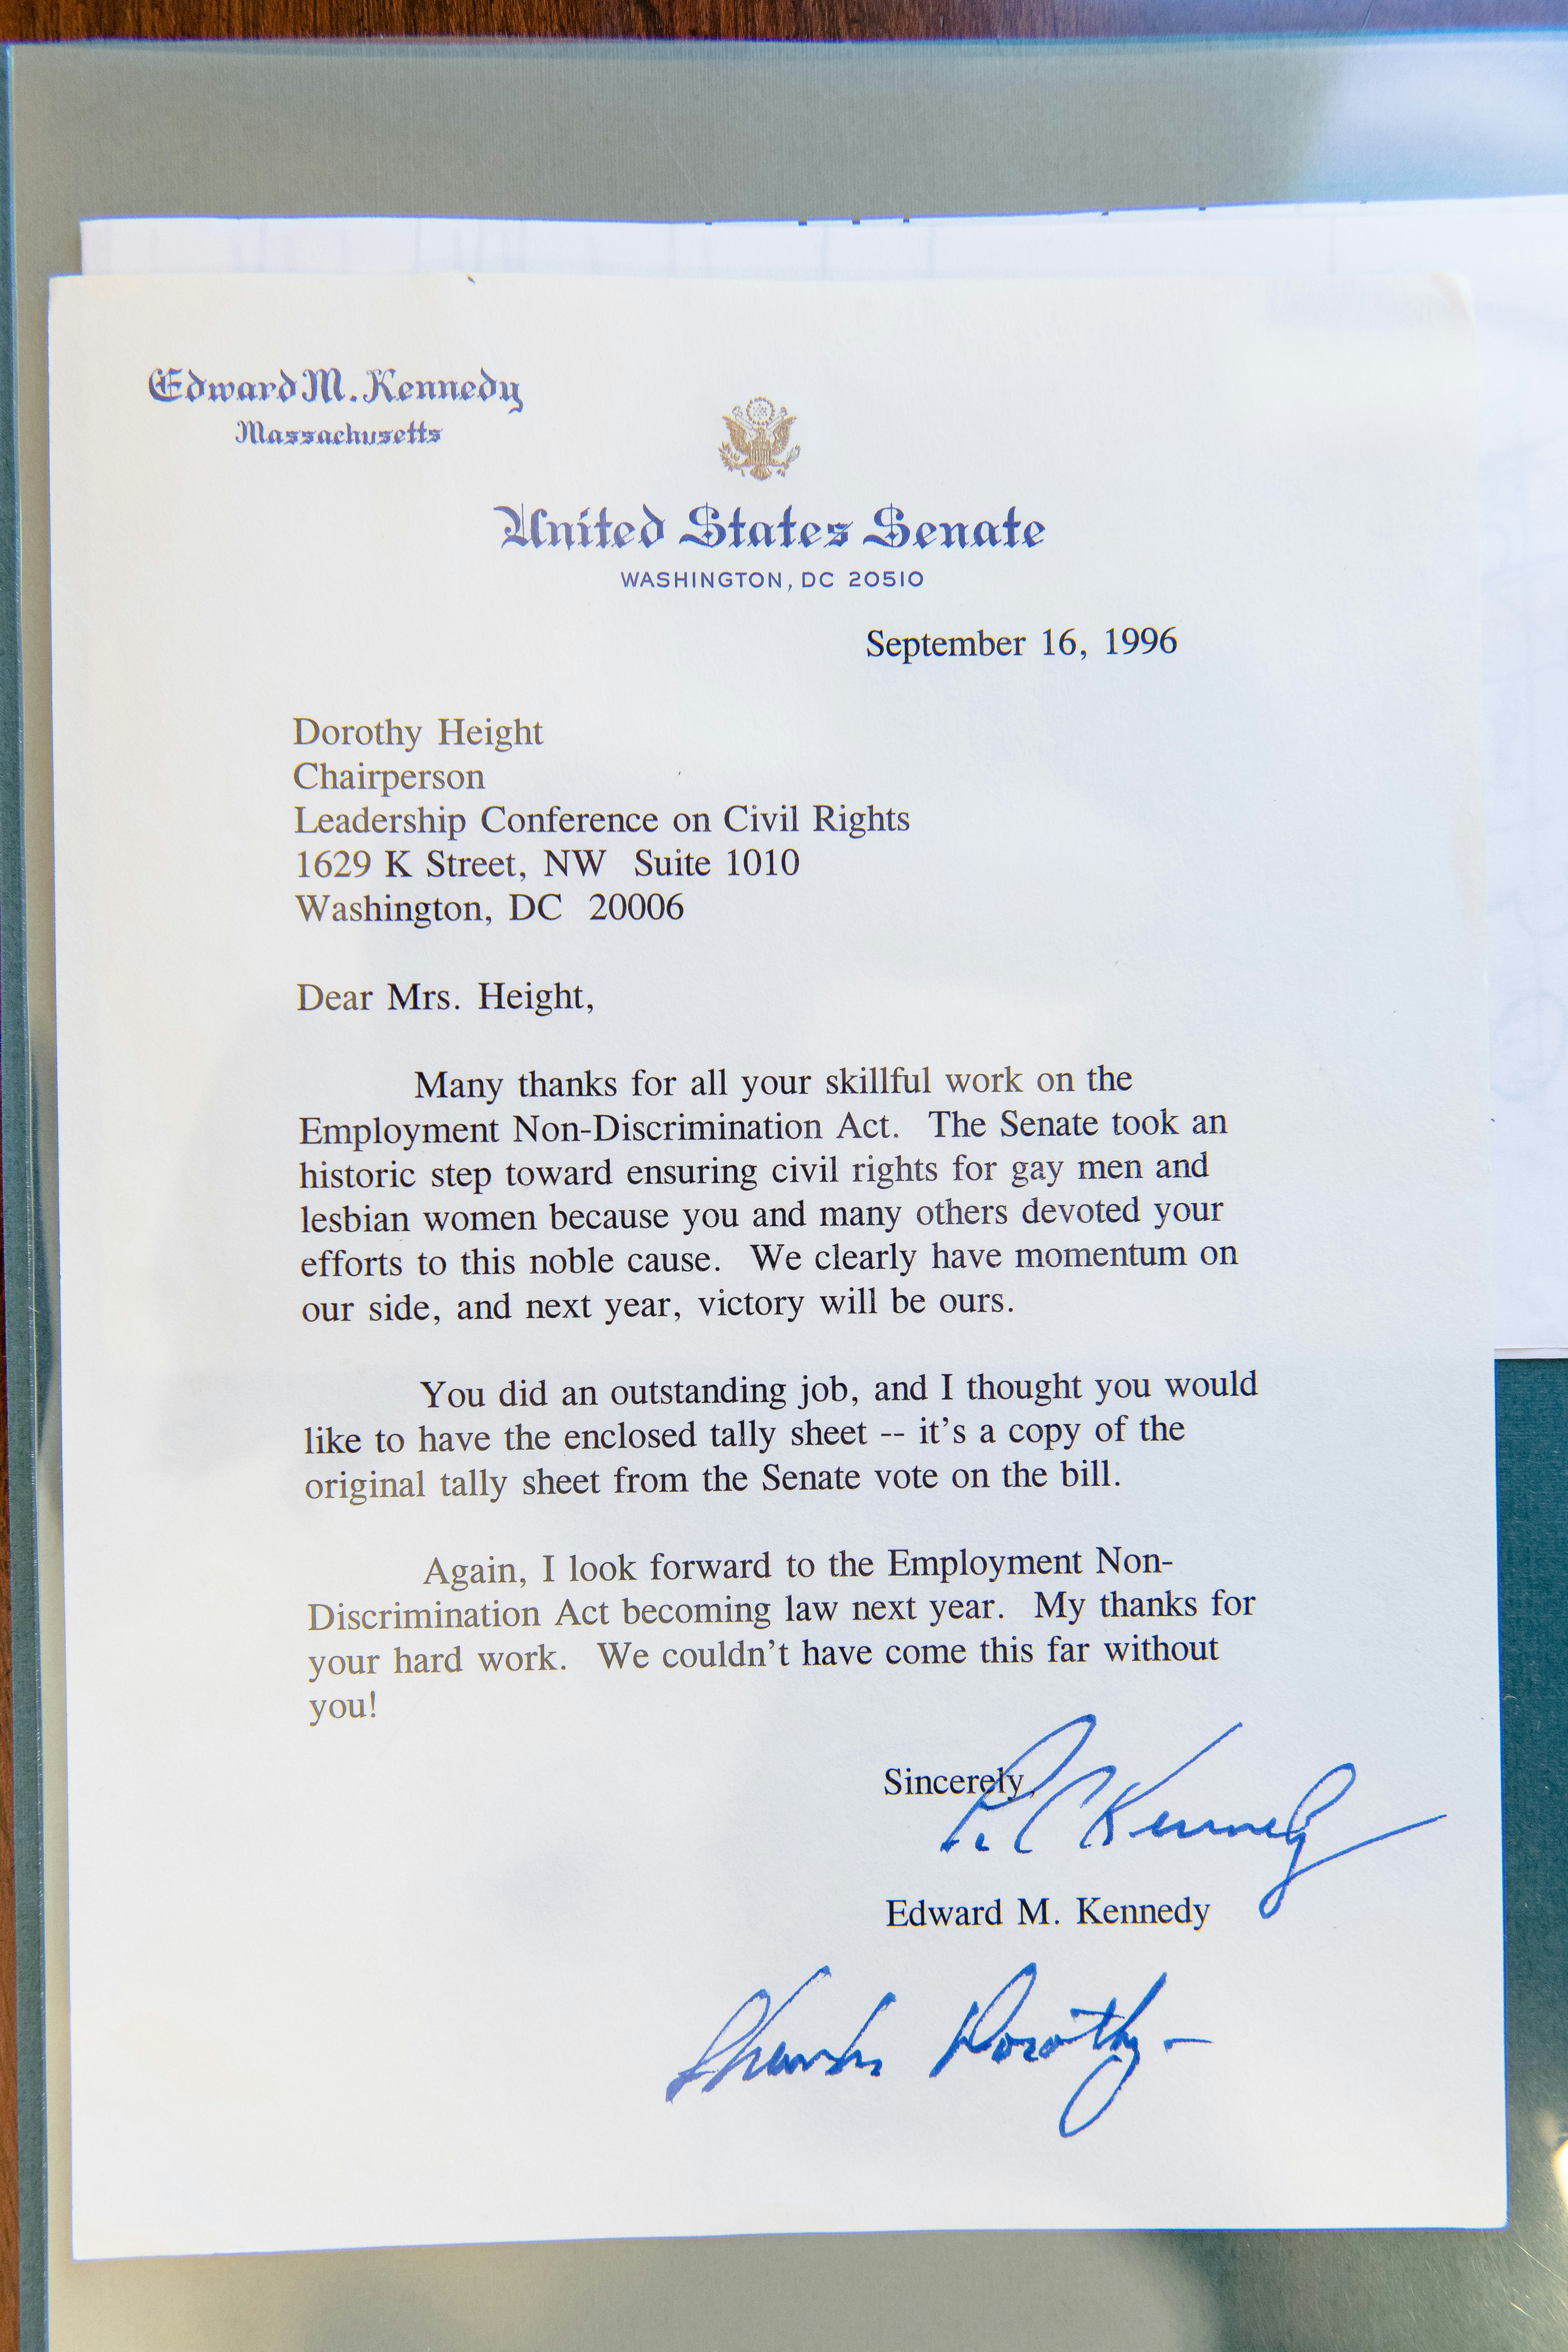 A letter from Senator Edward M. Kennedy on Senate stationery thanks Height for her work; it's dated September 16, 1996.